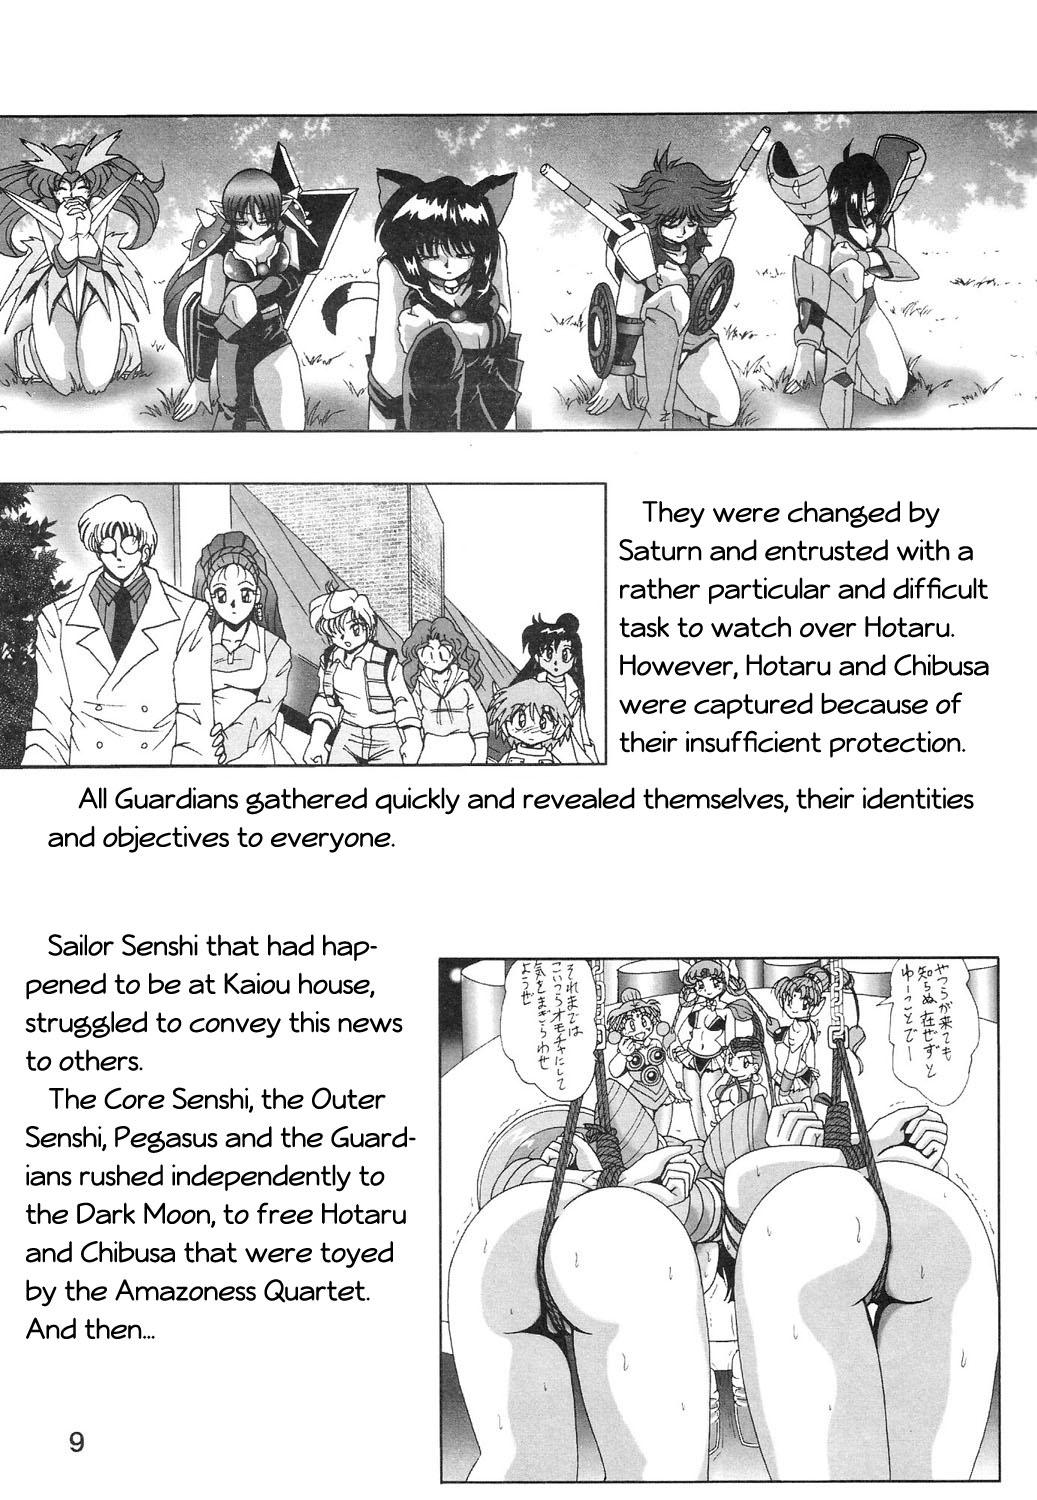 Oral Porn Silent Saturn SS vol. 8 - Sailor moon Chunky - Page 8